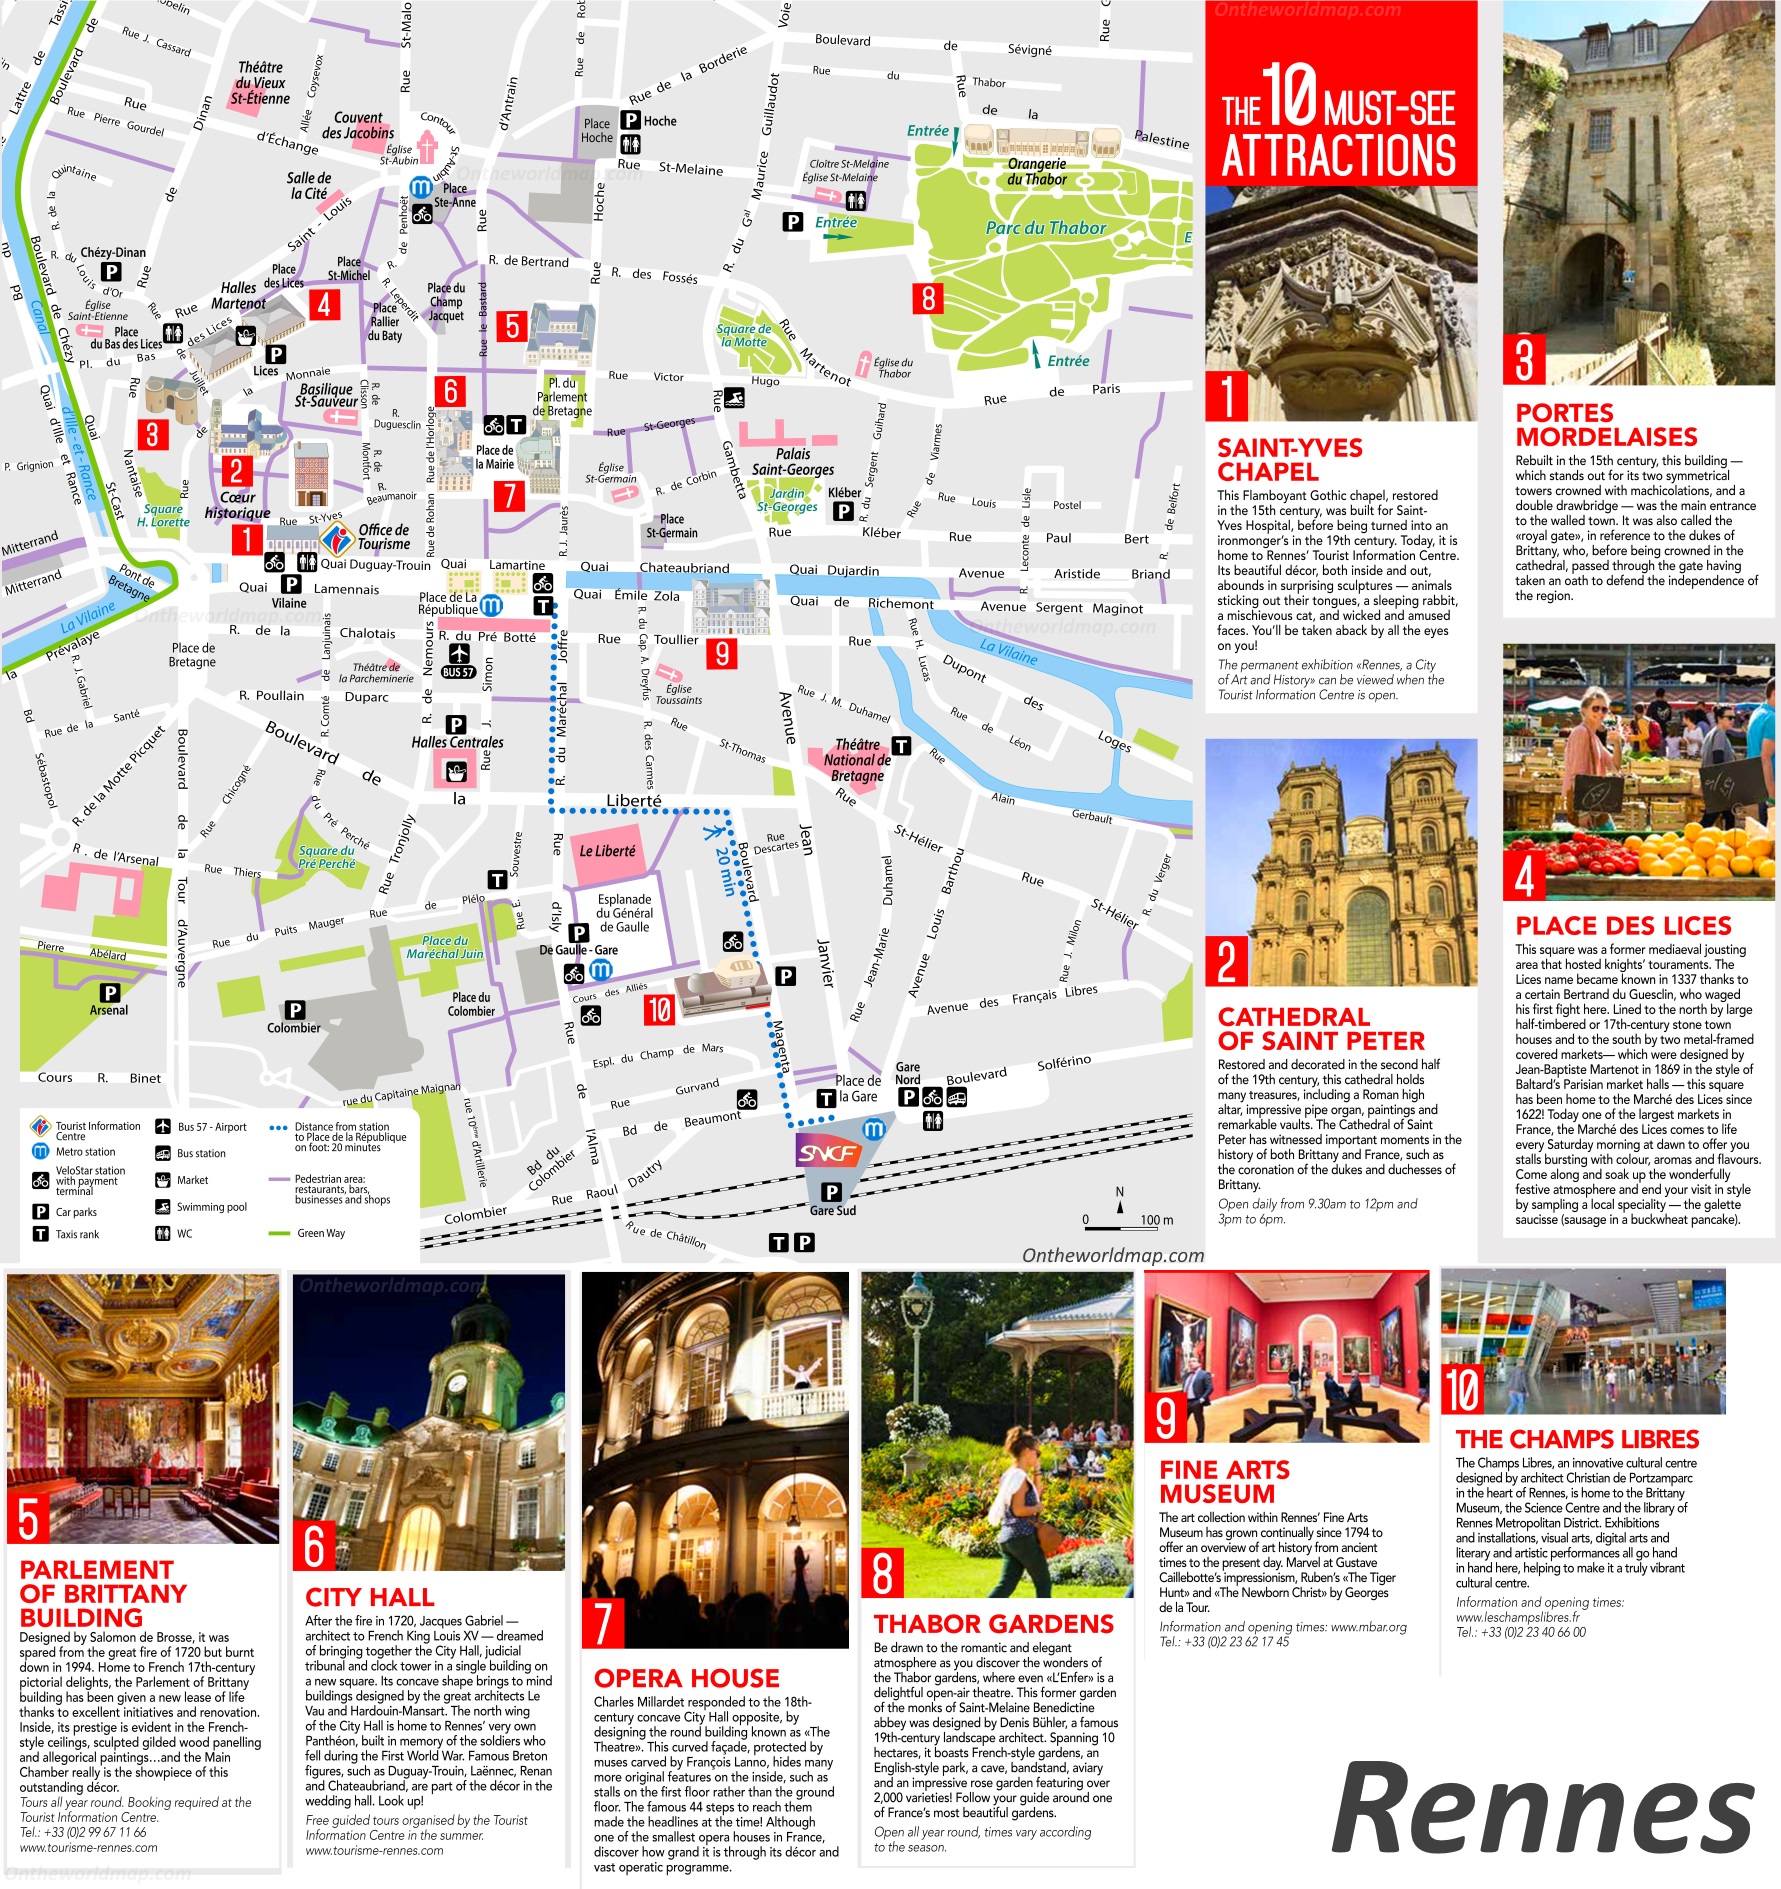 Rennes Tourist Attractions Map